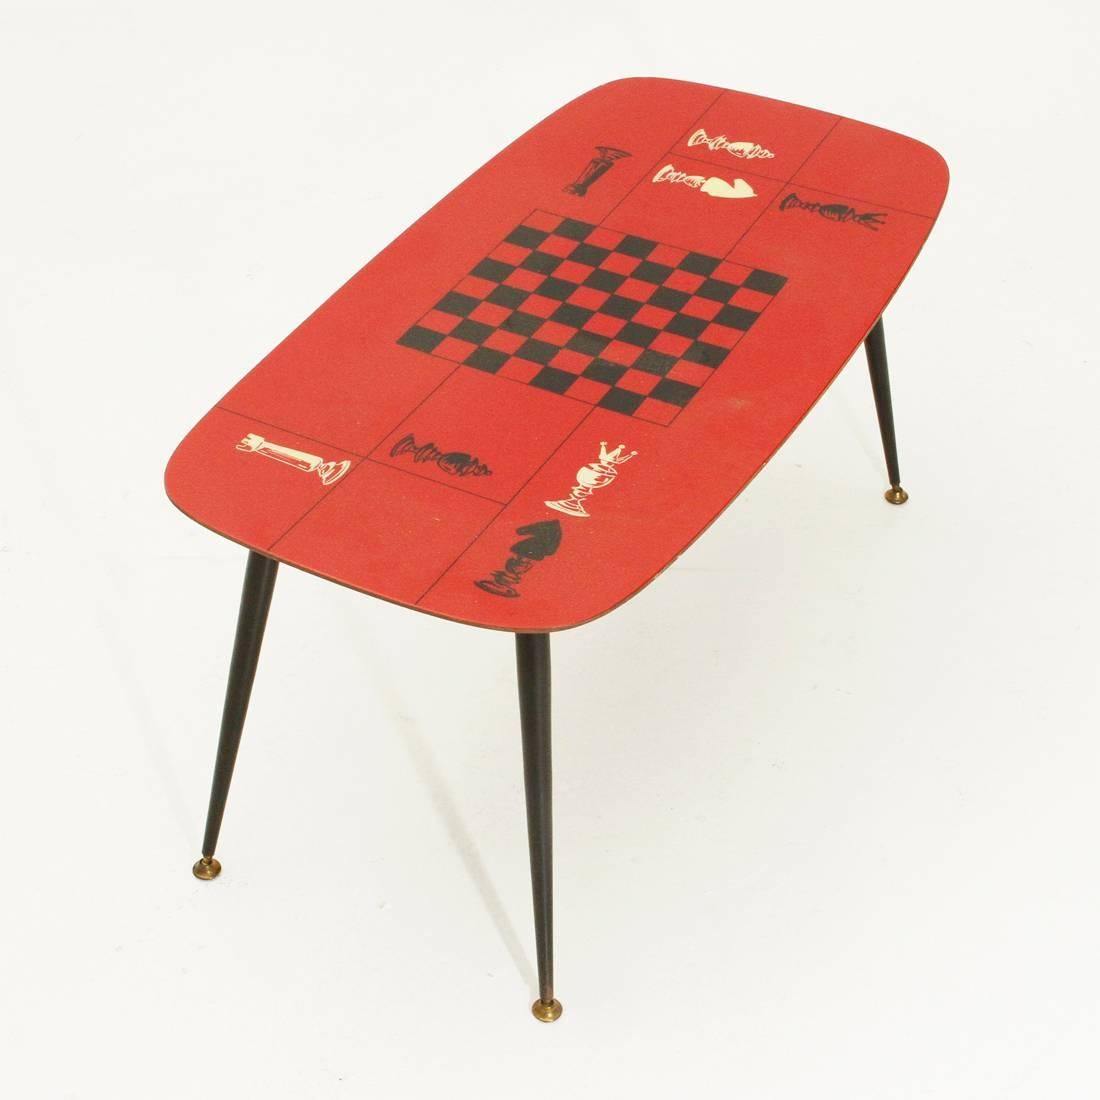 Italian manufacturing table produced in the 1950s.
Wooden top with red laminate surface.
Decorations depicting the game of chess.
Legs in black painted metal with adjustable brass feet.
Good general conditions, some signs due to normal use over